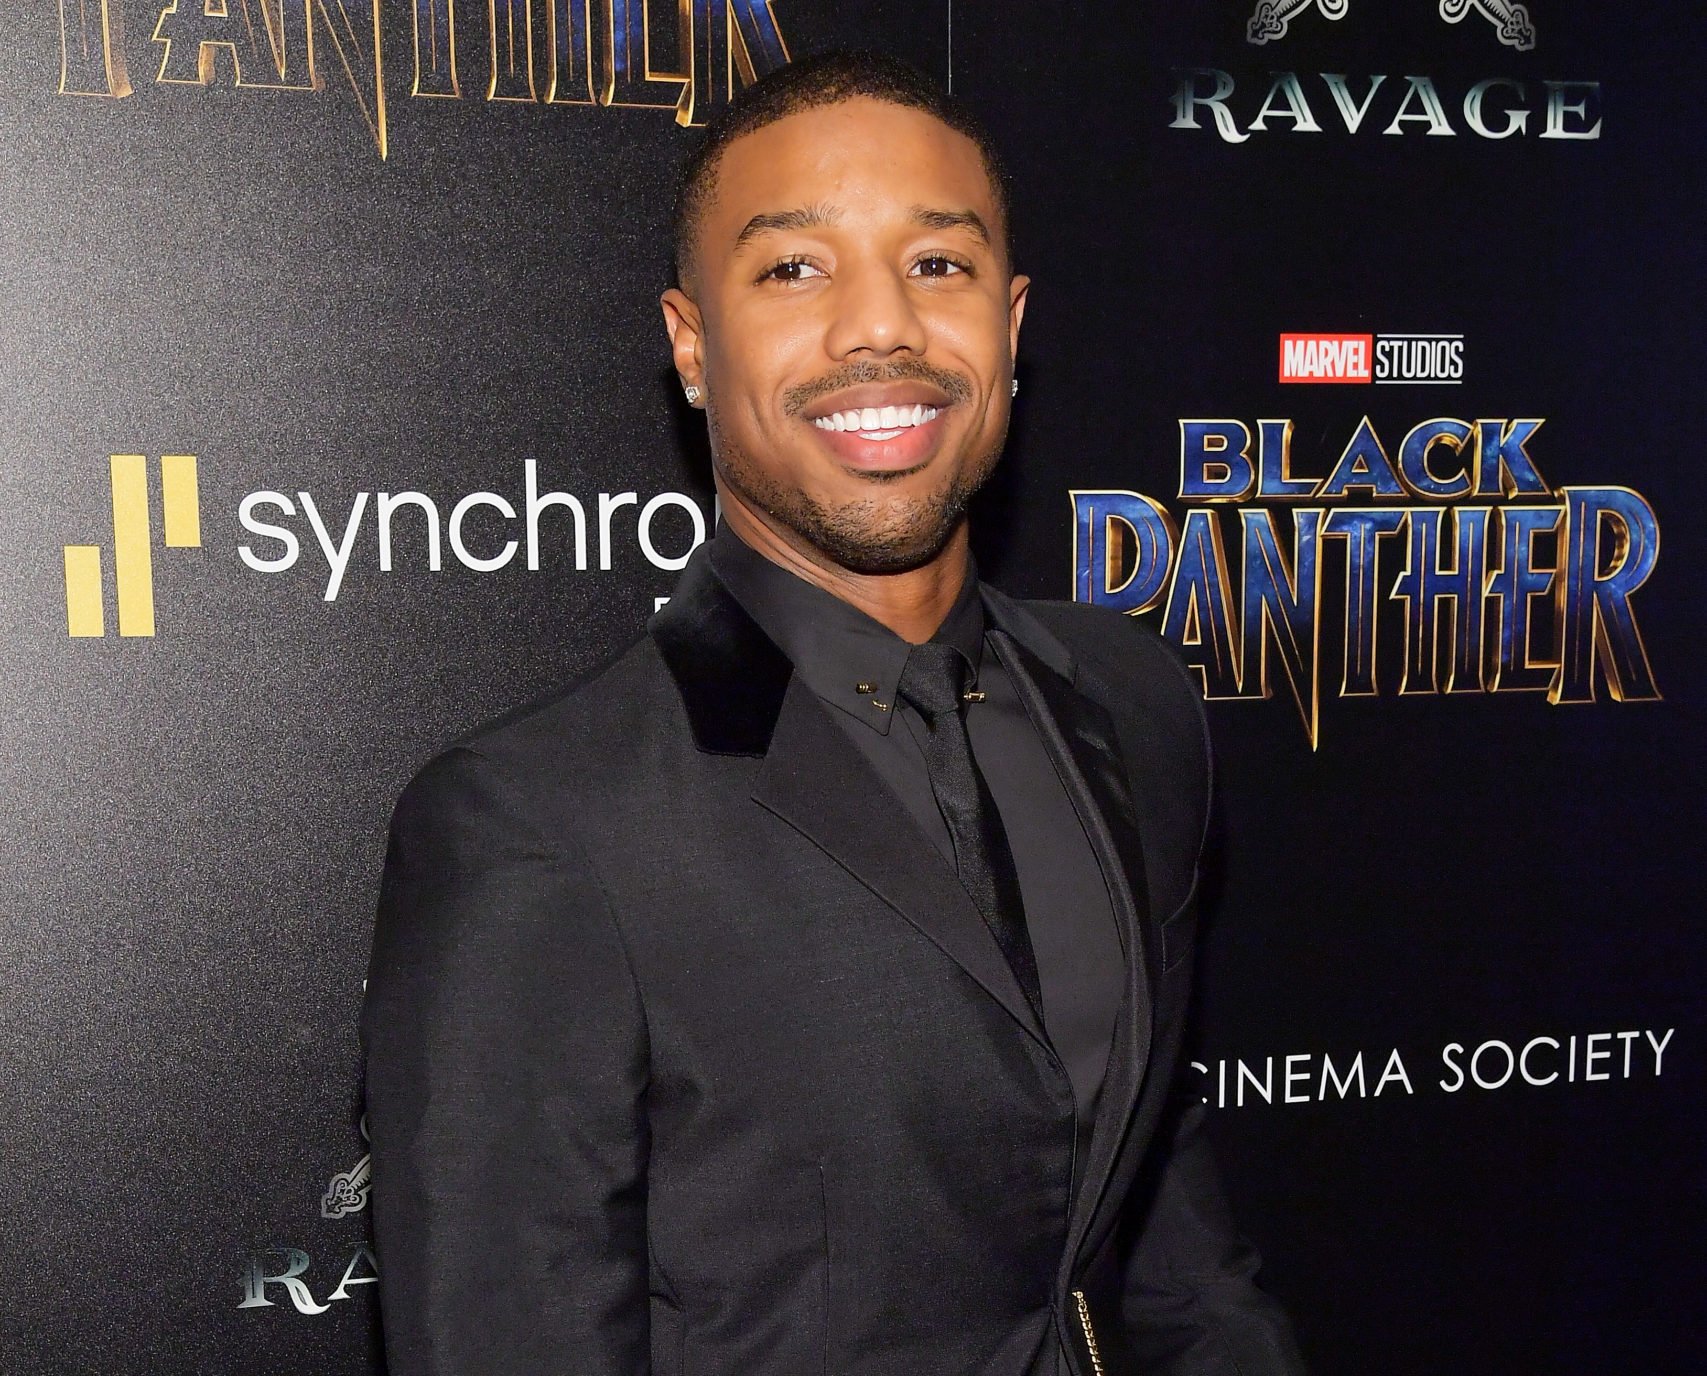 Michael B. Jordan Says He Would Be Open To Returning For ‘Black Panther 2’ If Asked